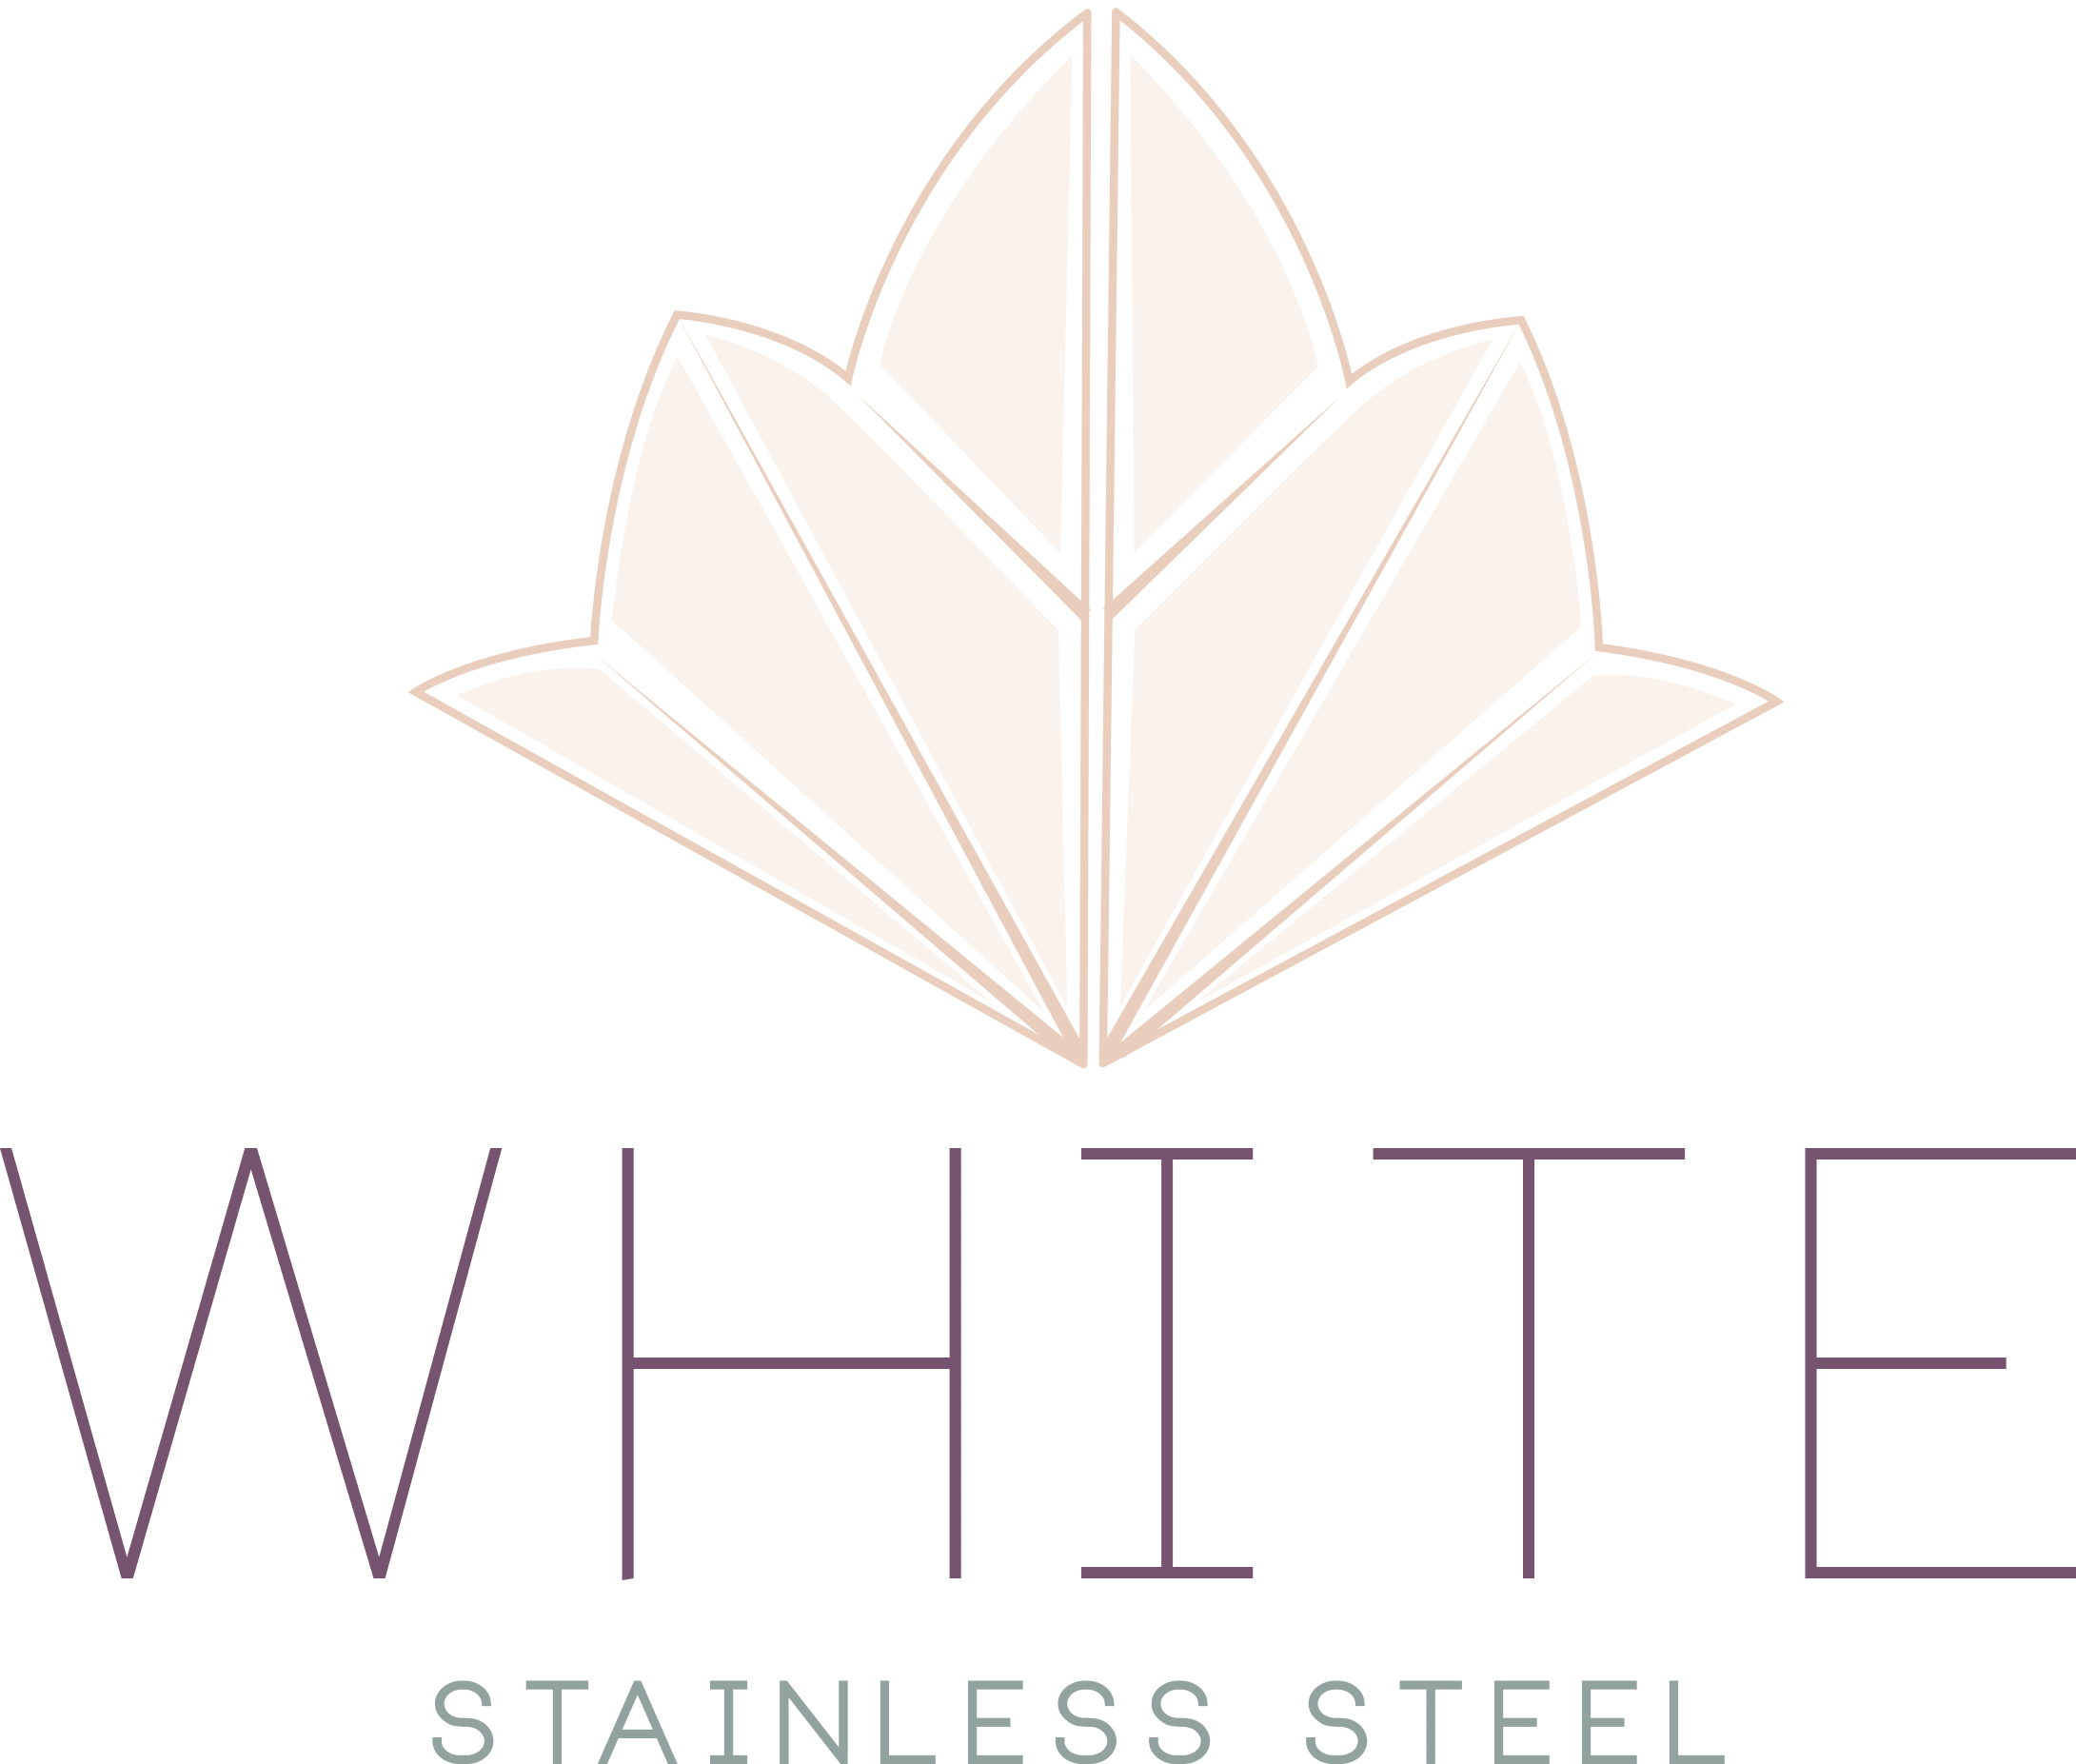 White Stainless Steel